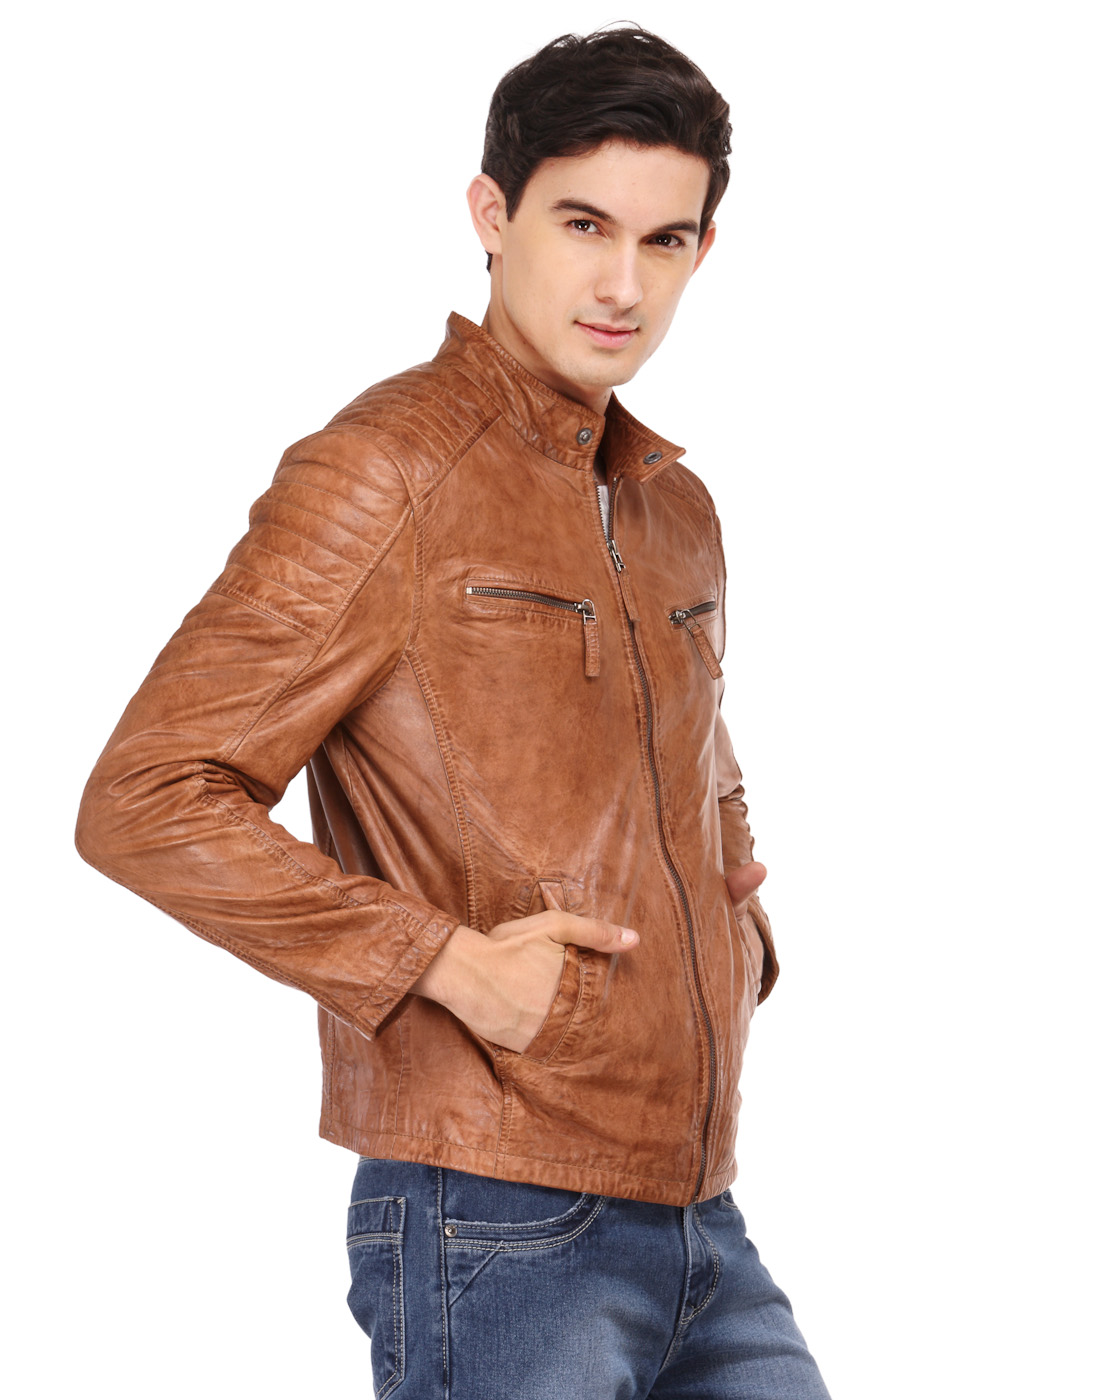 Buy Teakwood leather Jackets Online @ ₹14899 from ShopClues